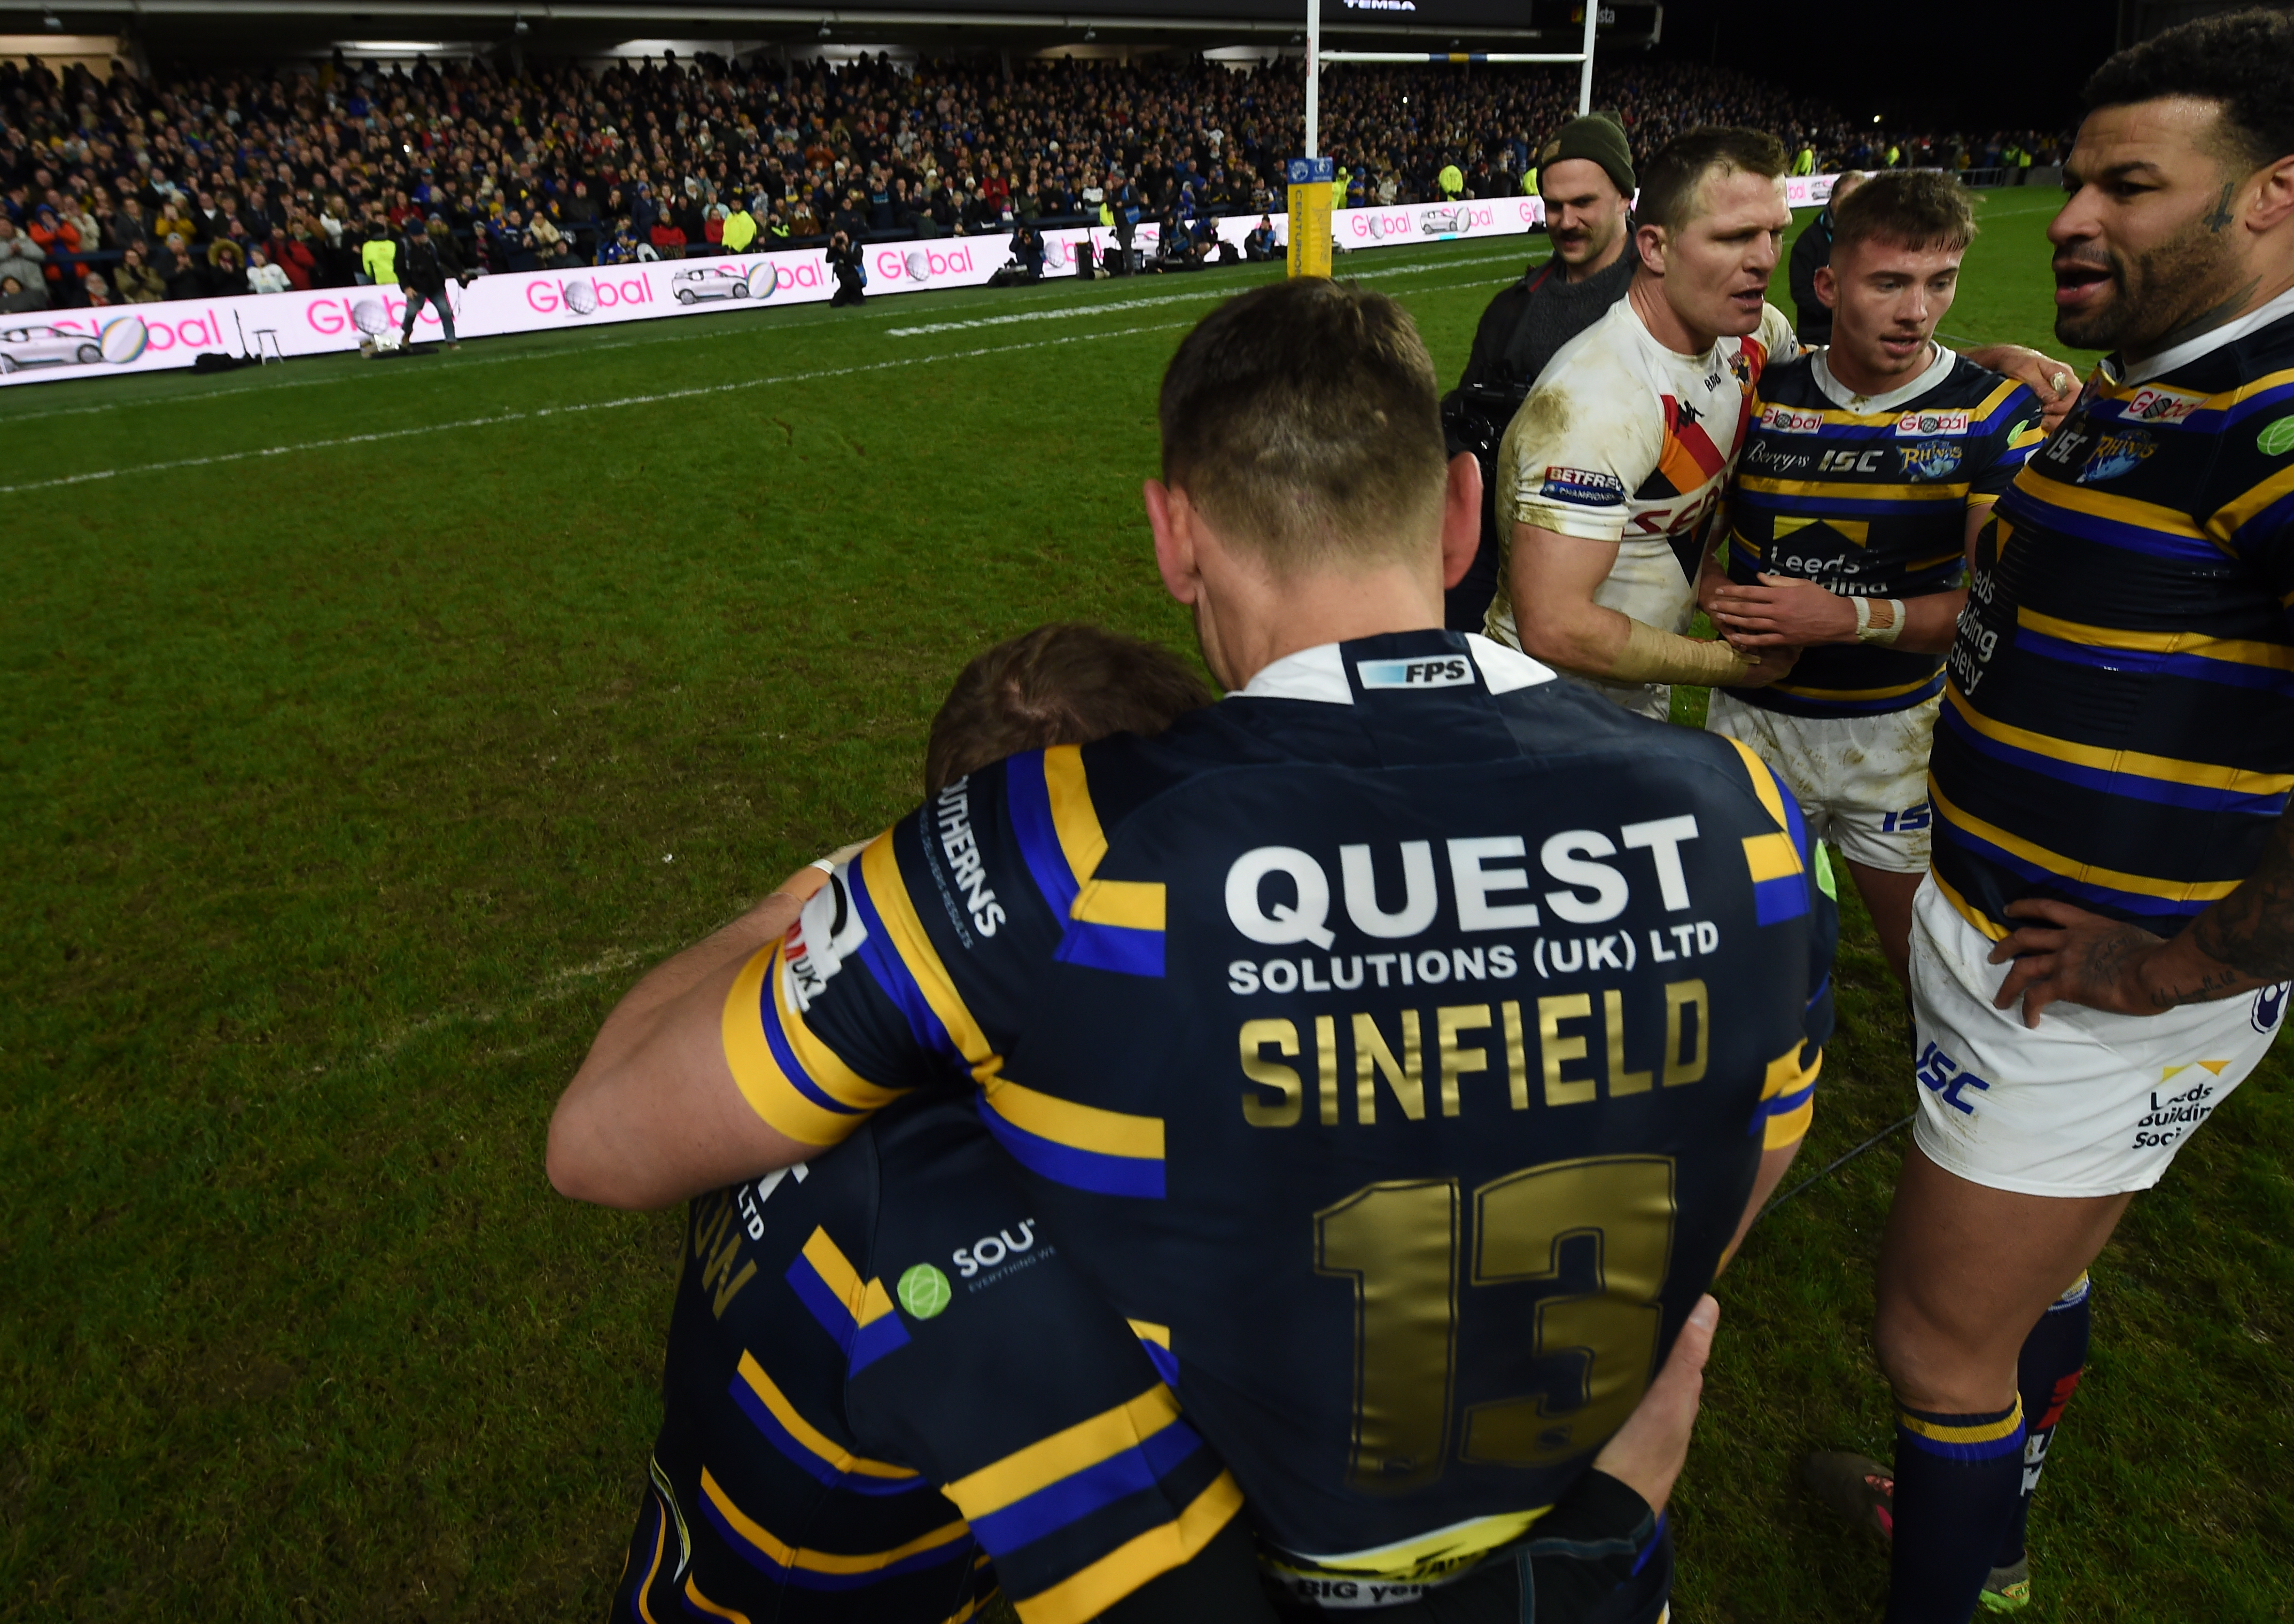 The image from the fundraising game between Leeds and Bradford in January 2020 that the statue is based on